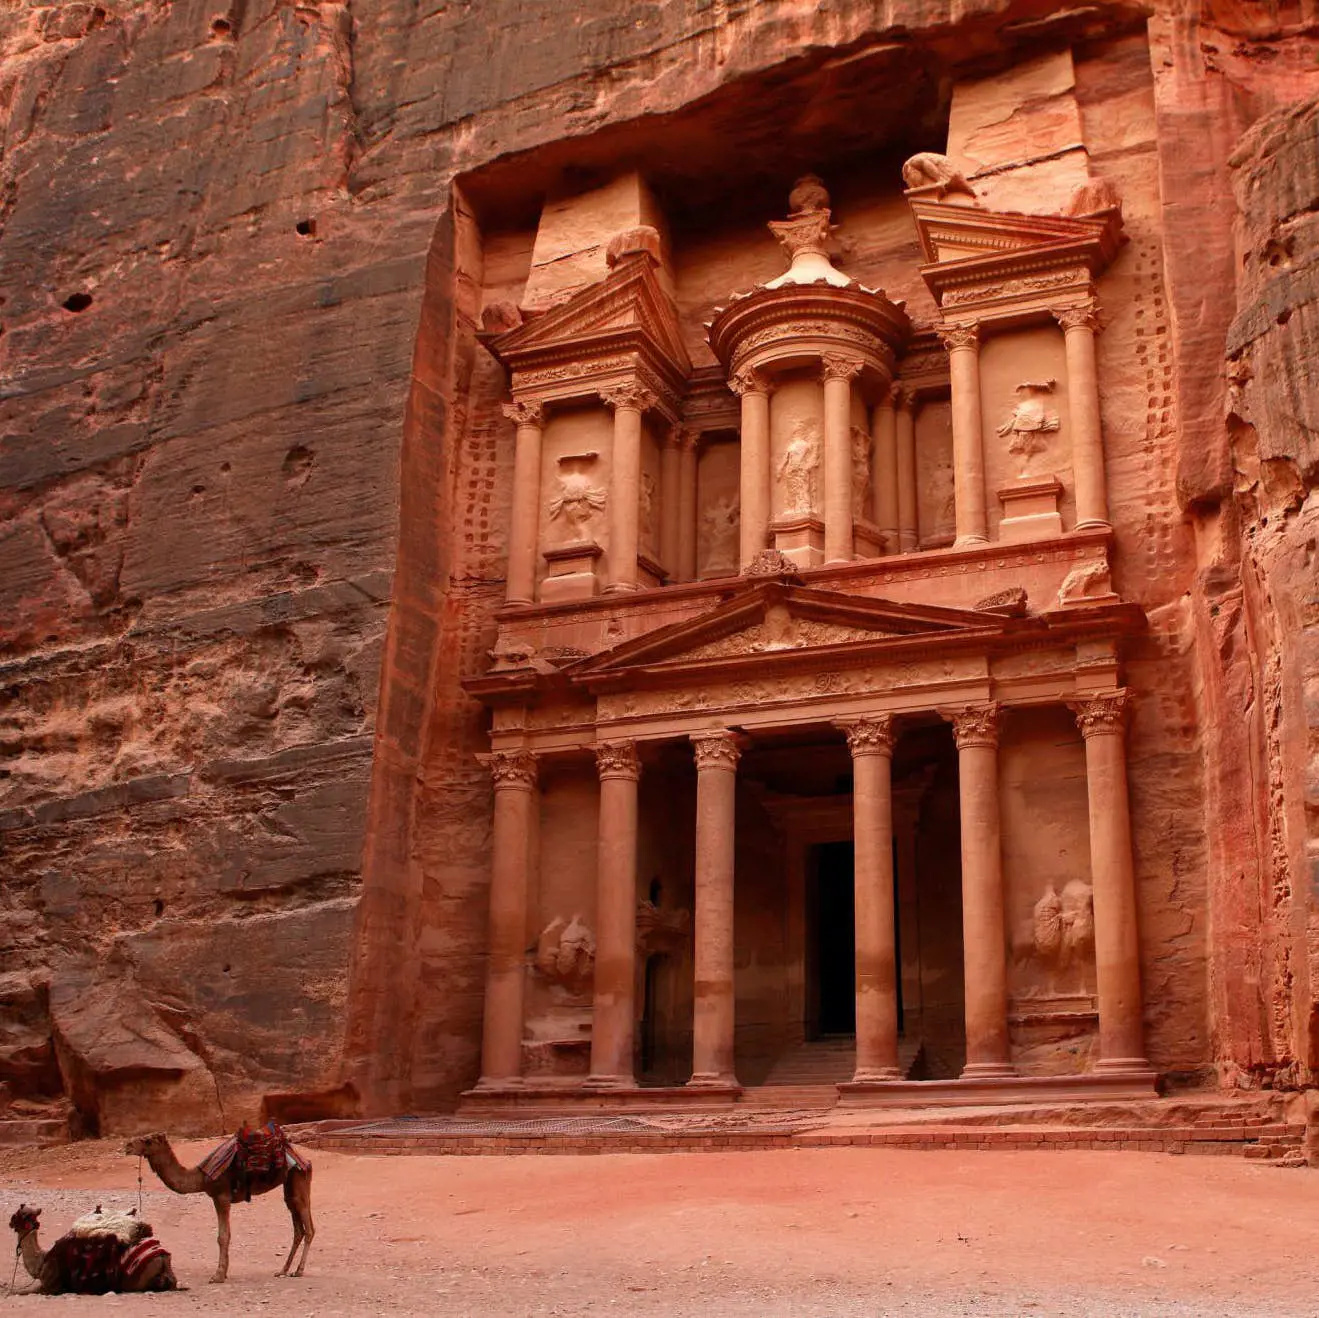 Petra was recently opened for tourism and has brought billions to Jordan in tourism money